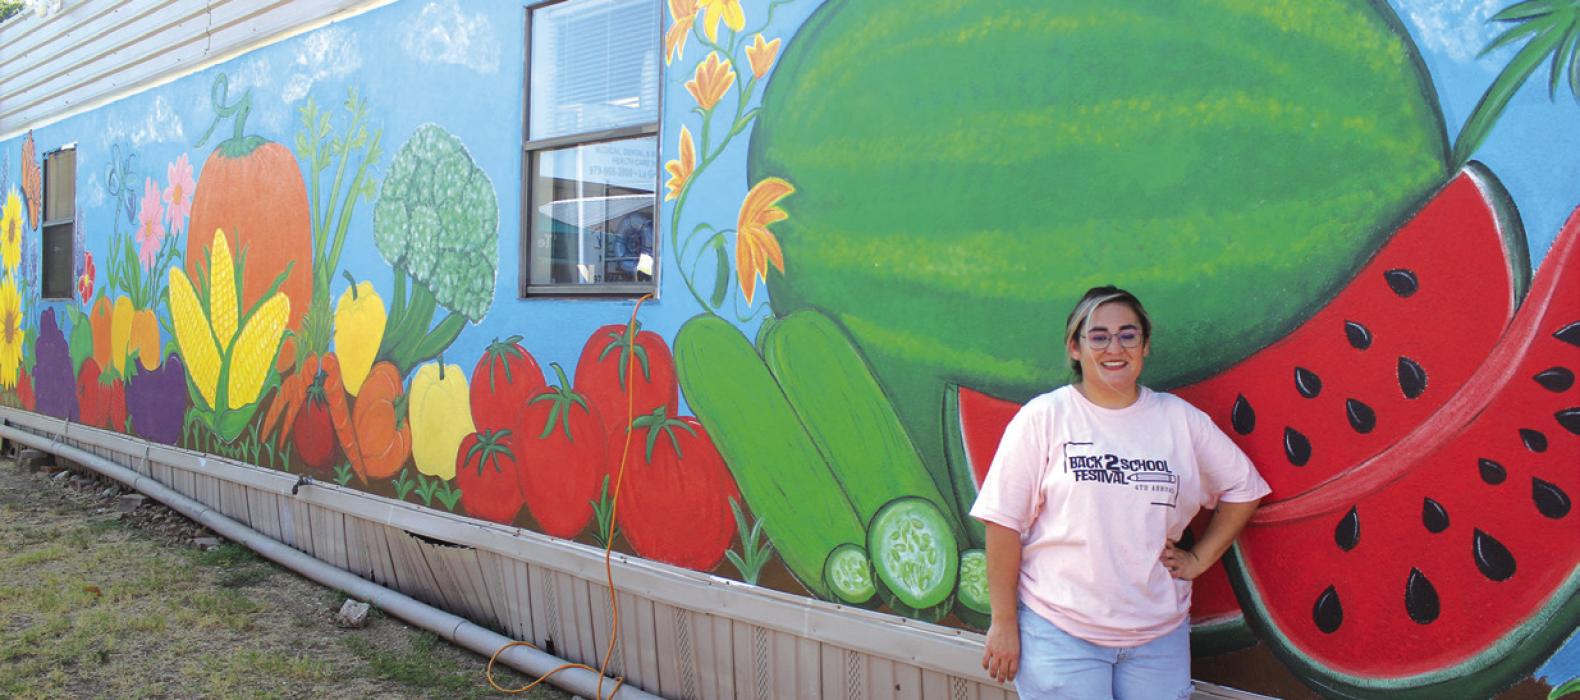 Juanita Navarro stands next to the mural she painted in the Tejas Clinic community garden, site of Saturday’s festival. Photos by Jeff Wick